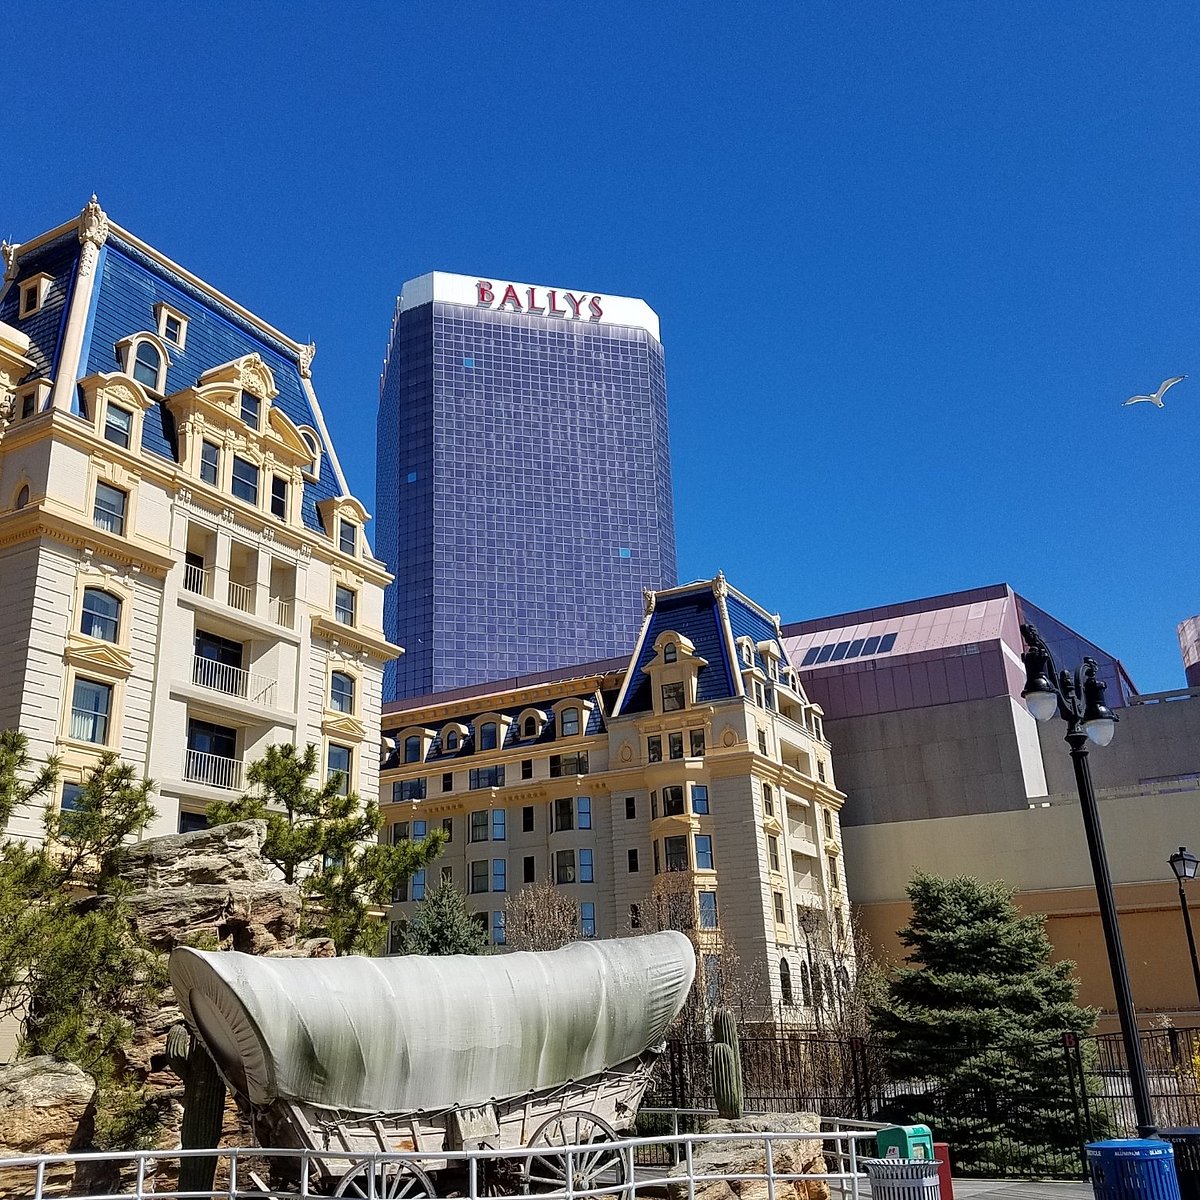 After renovation, Bally's Las Vegas to rename tower: Travel Weekly